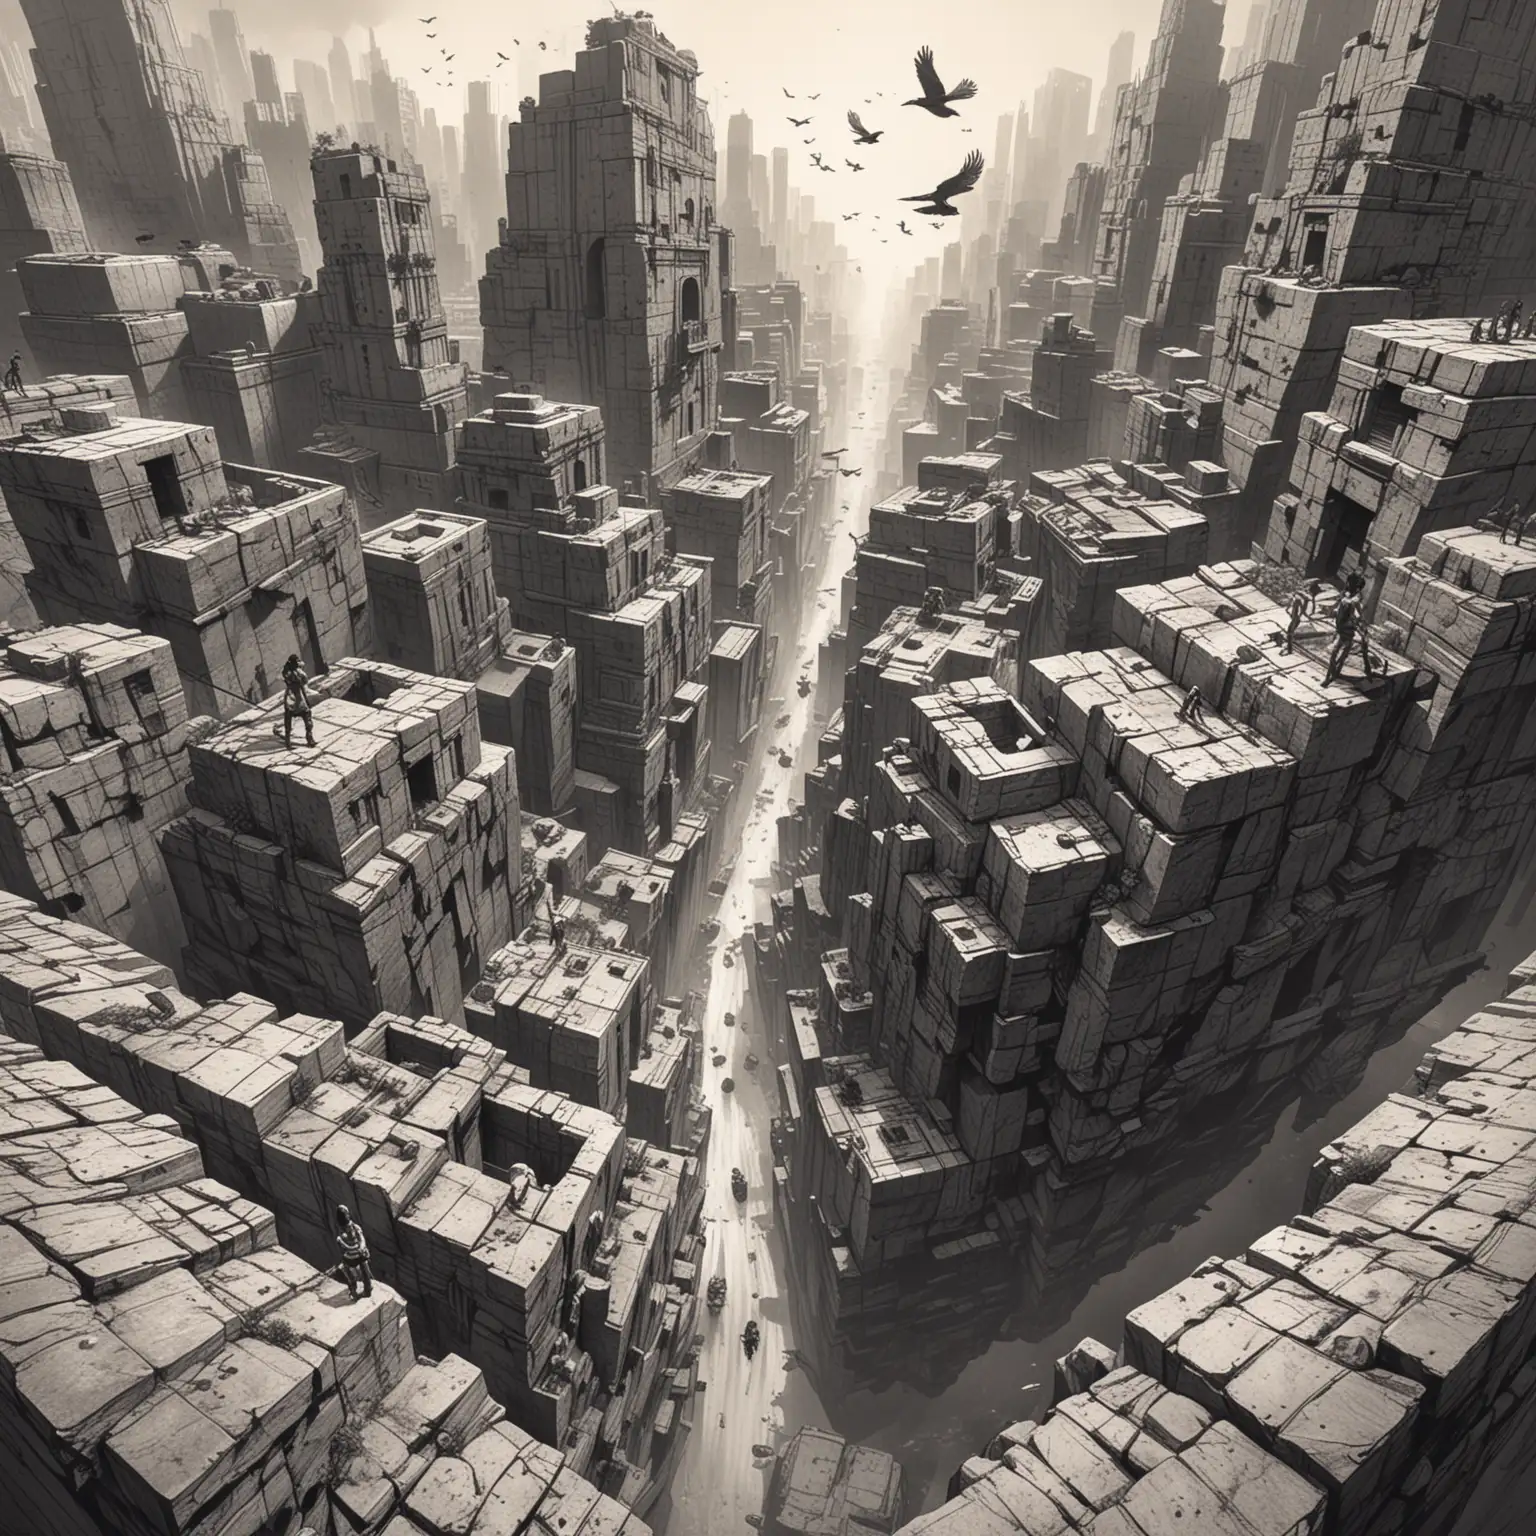 Urban Exploration Tomb Raider Style City Sketch in 3Point Perspective